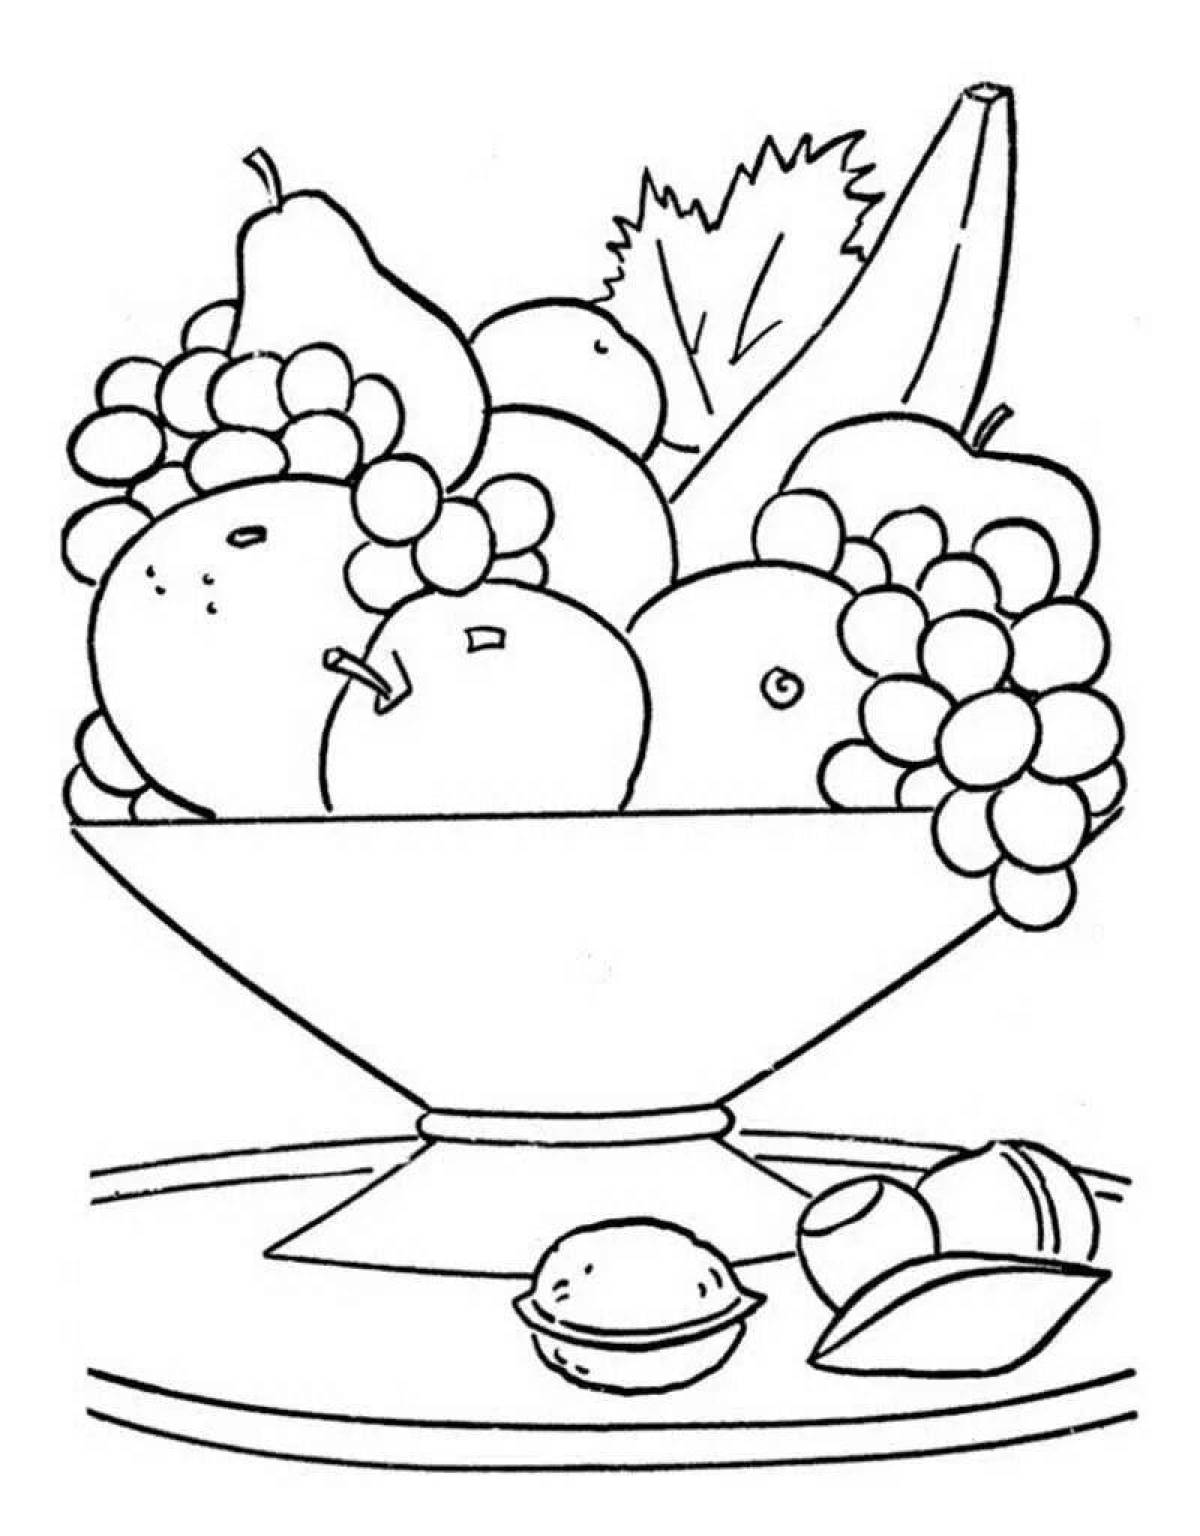 Color-lush mevalar coloring page